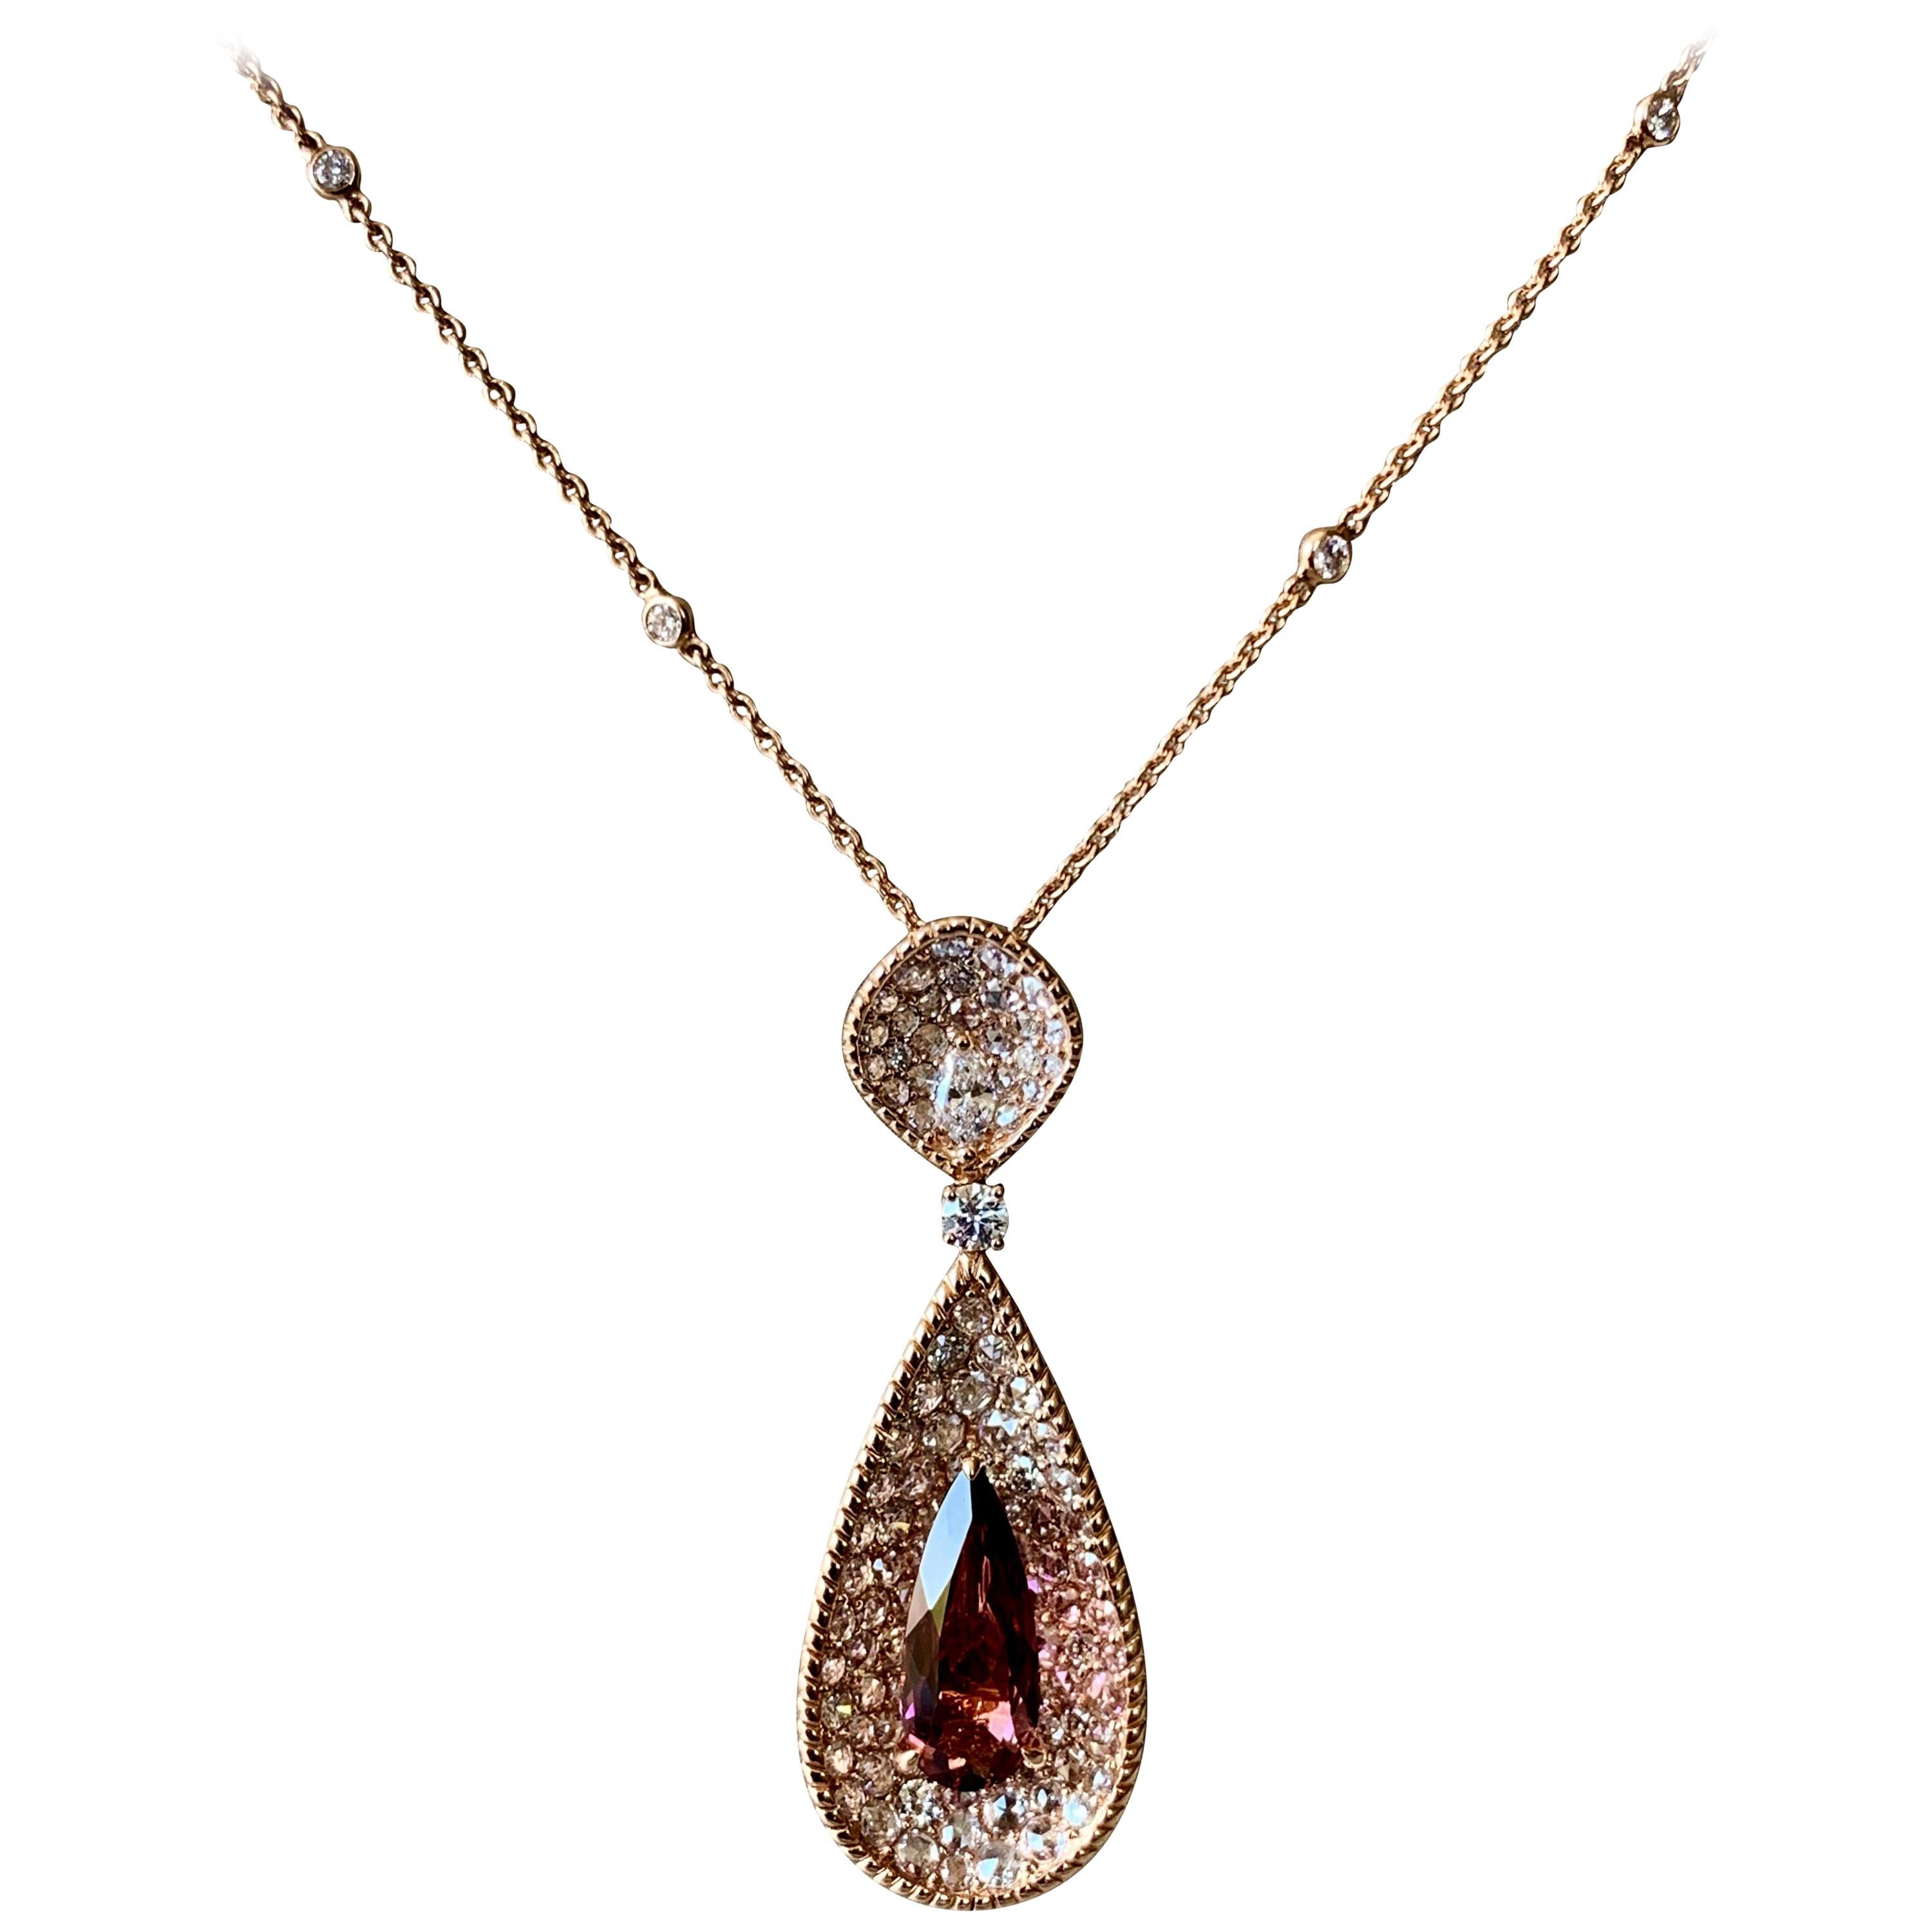 18 K Pink Tourmaline and Diamond Pendant with 18 K Pink Gold Chain